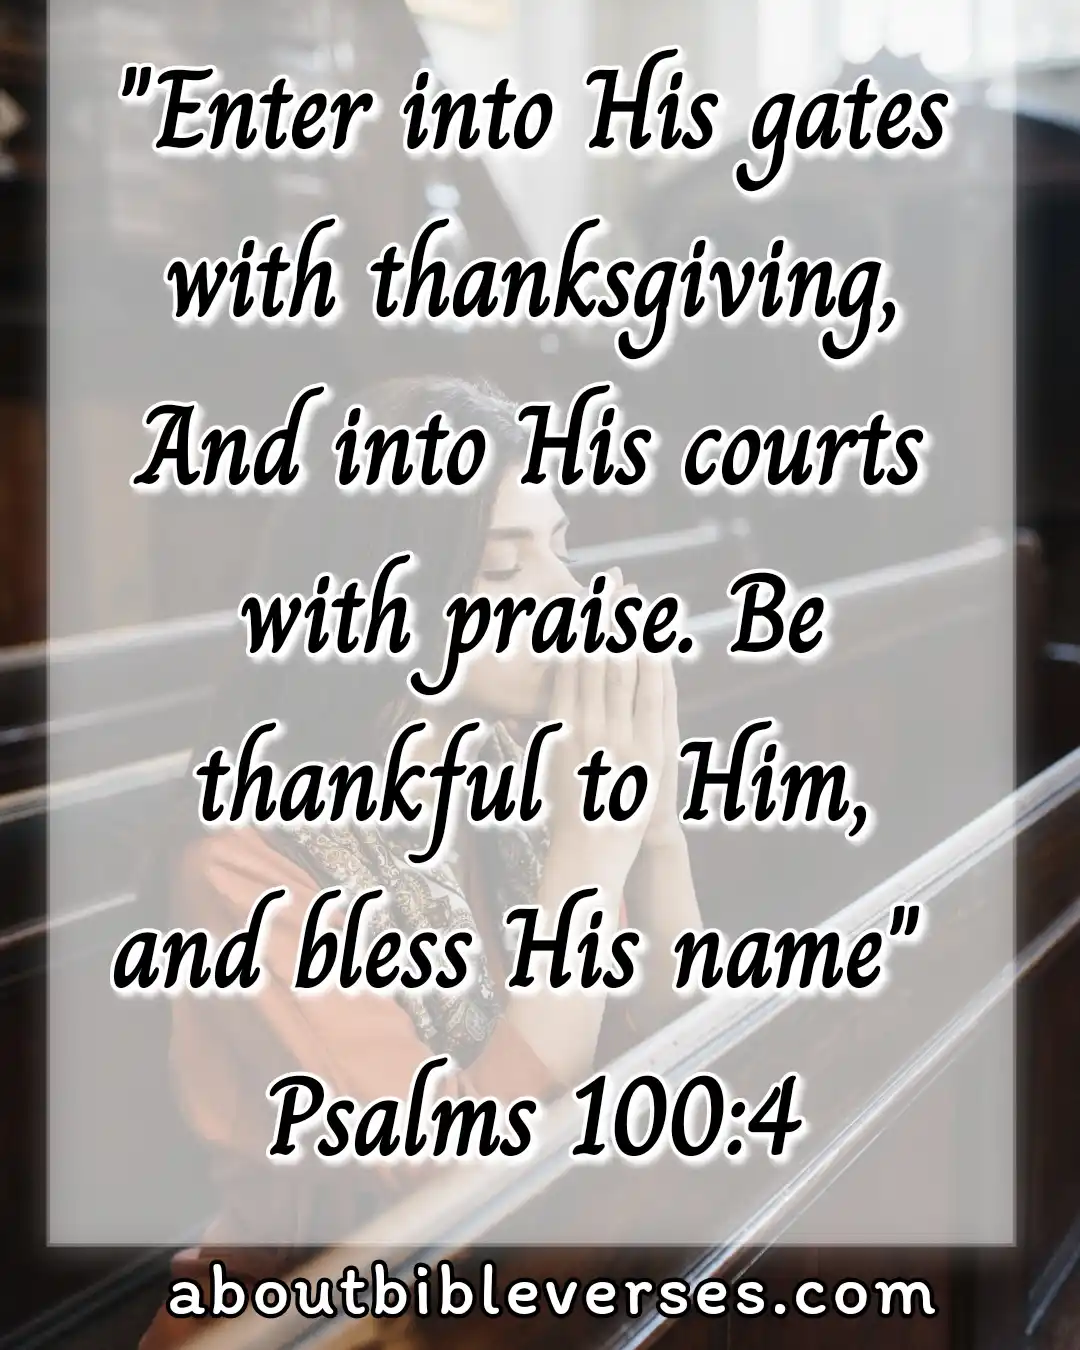 Bible Verses About Appreciating The Little Things In Life (Psalm 100:4)